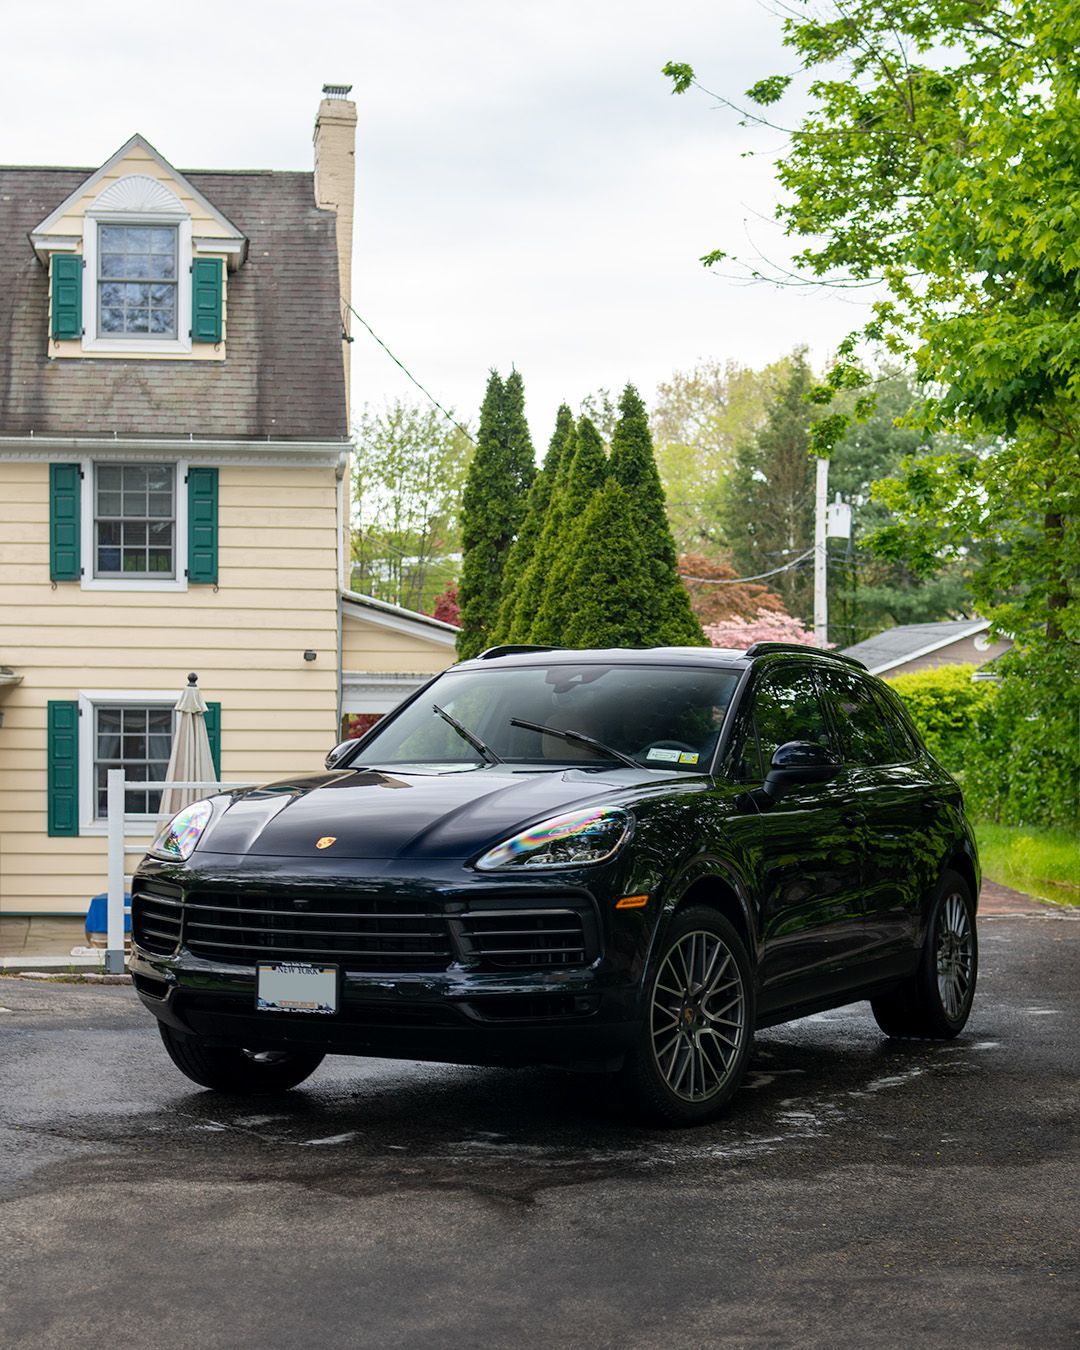 A black porsche cayenne is parked in front of a house.